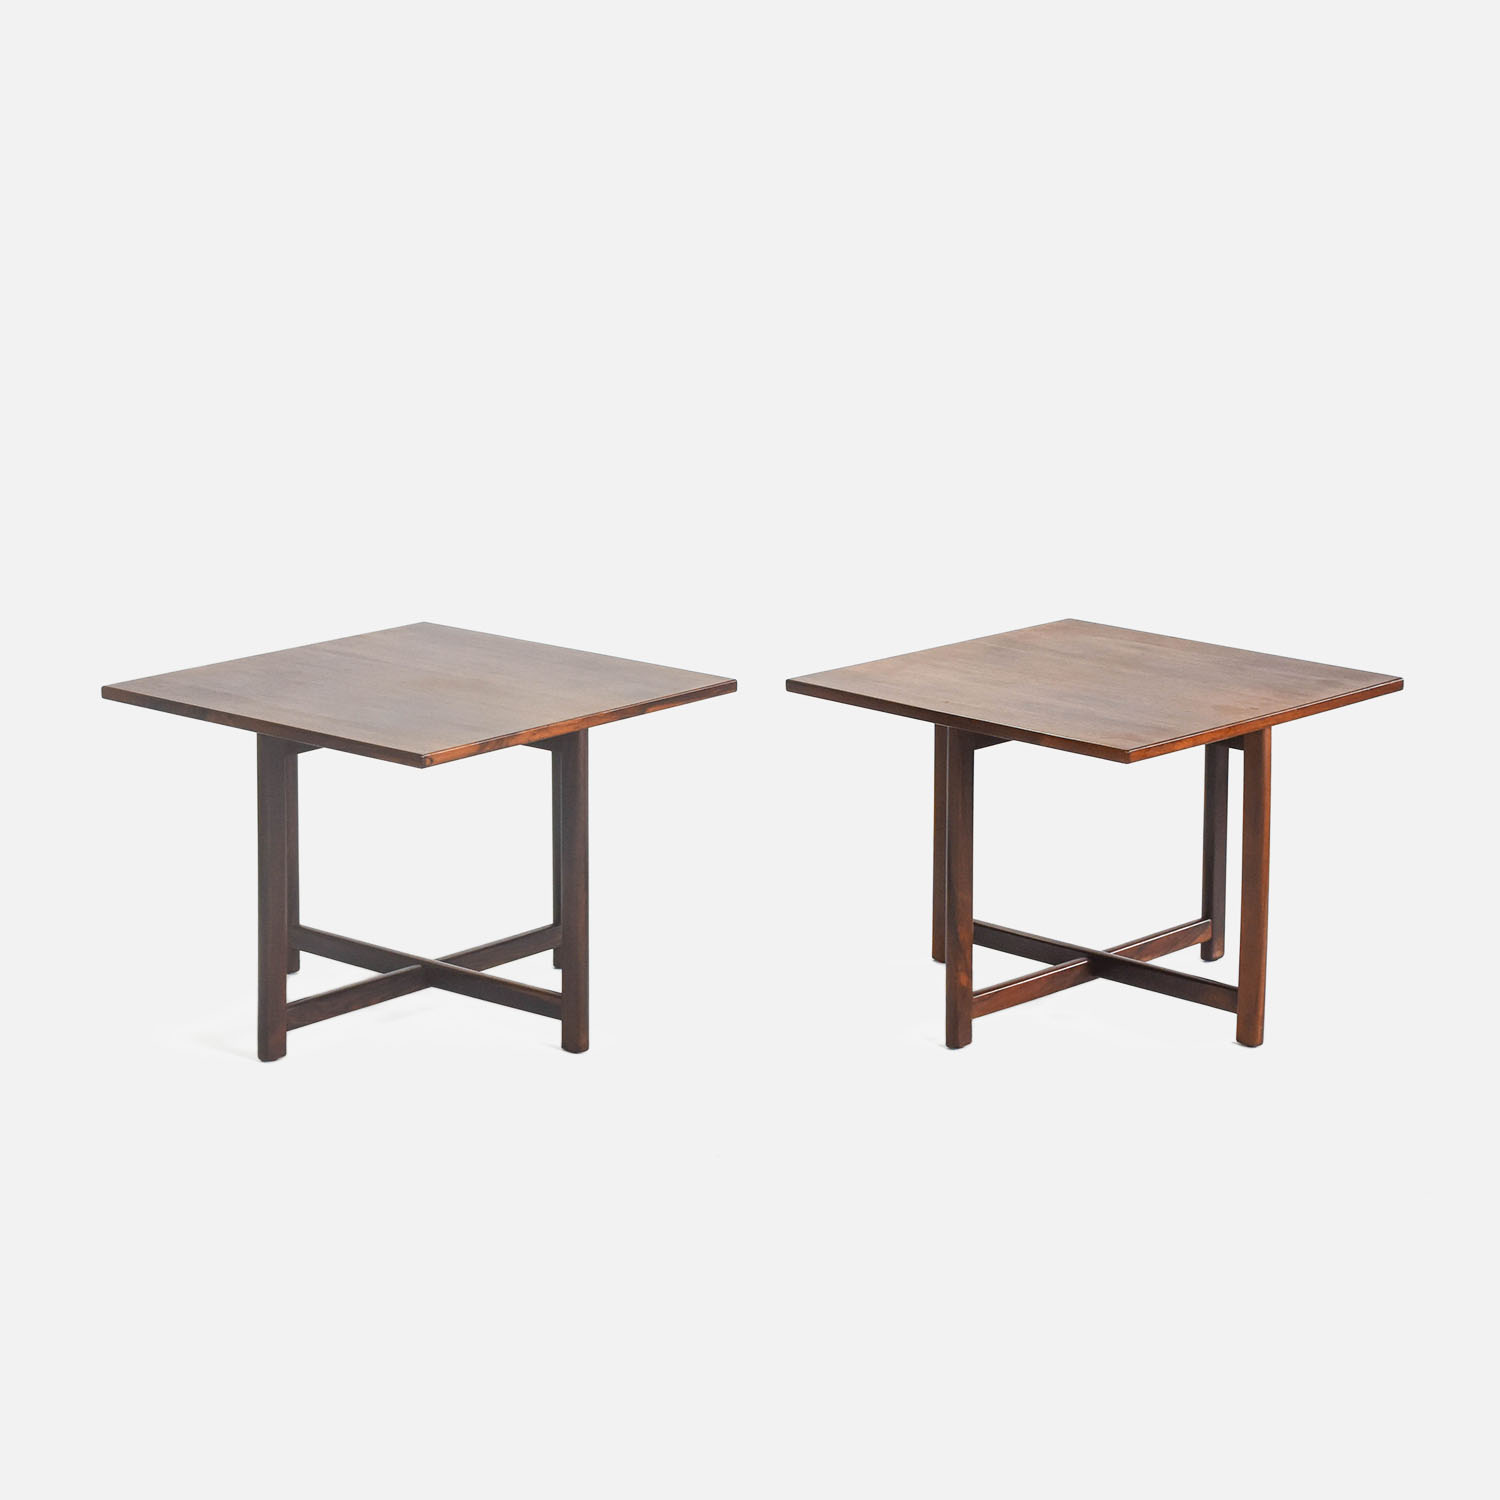 Two Durup Polster Mobler Rosewood Occasional Side Tables Danish MCM Modern